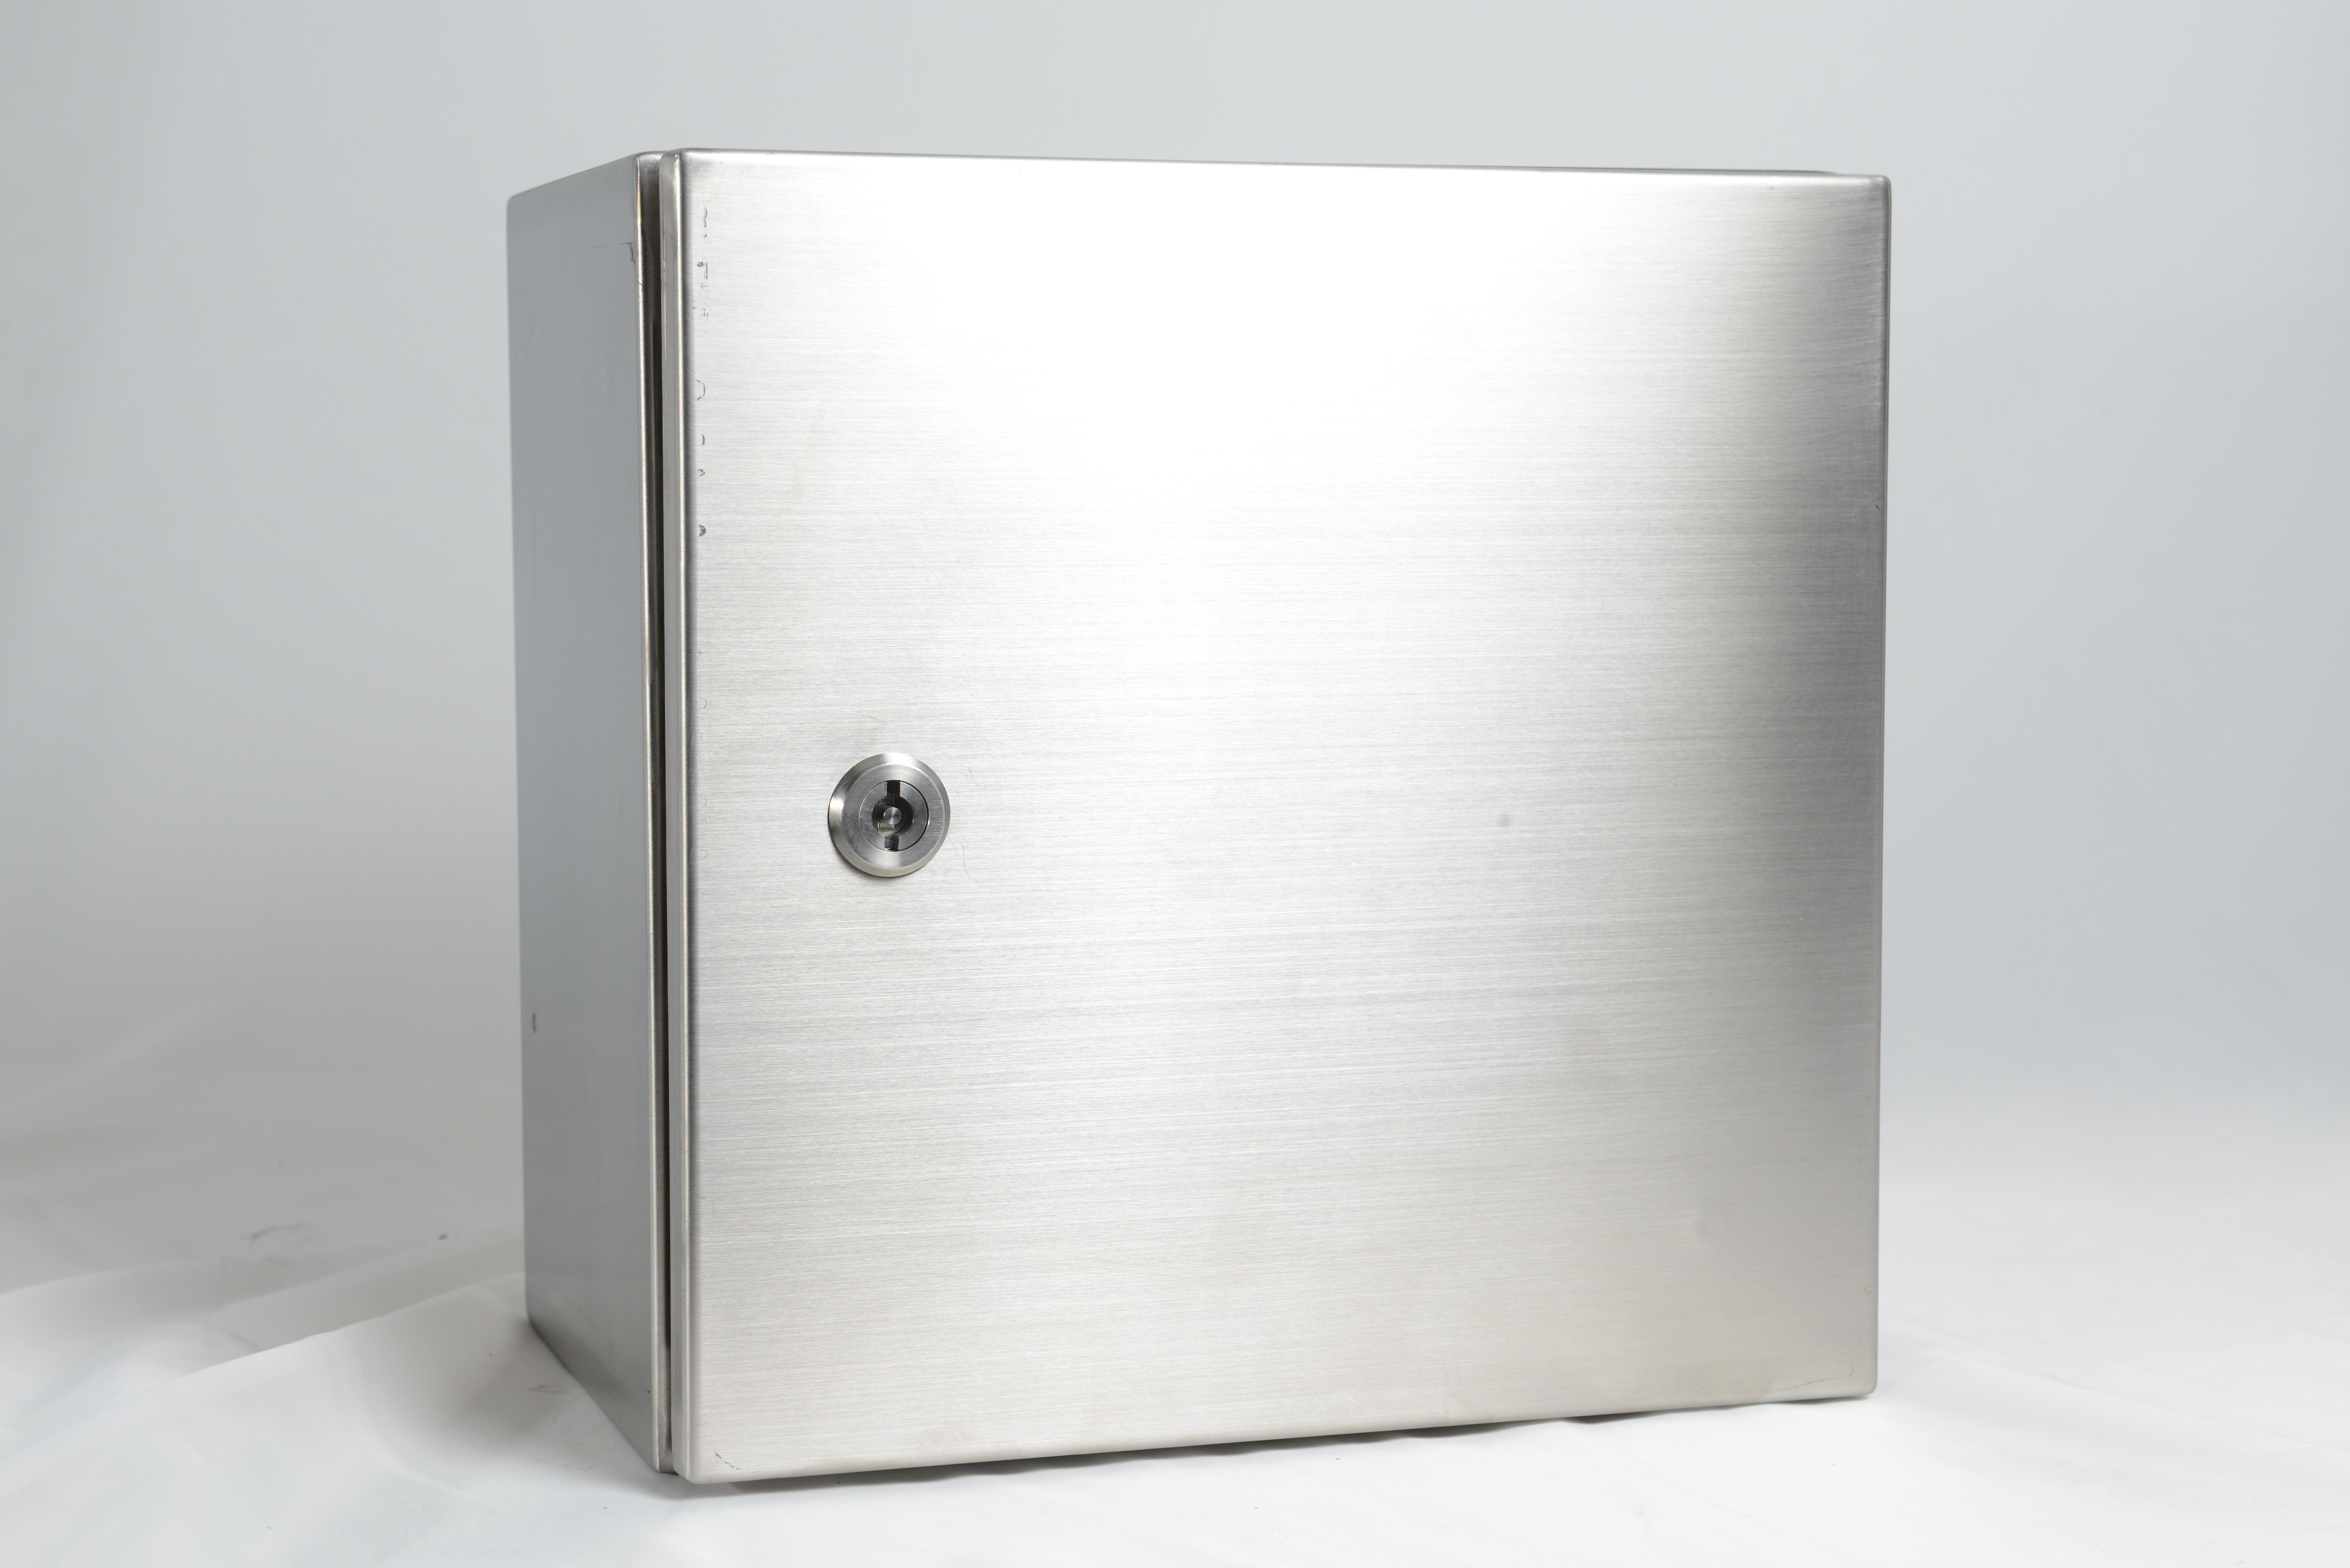 RCG stainless steel enclosure 316 grade 600x600x300mm - wall mounting